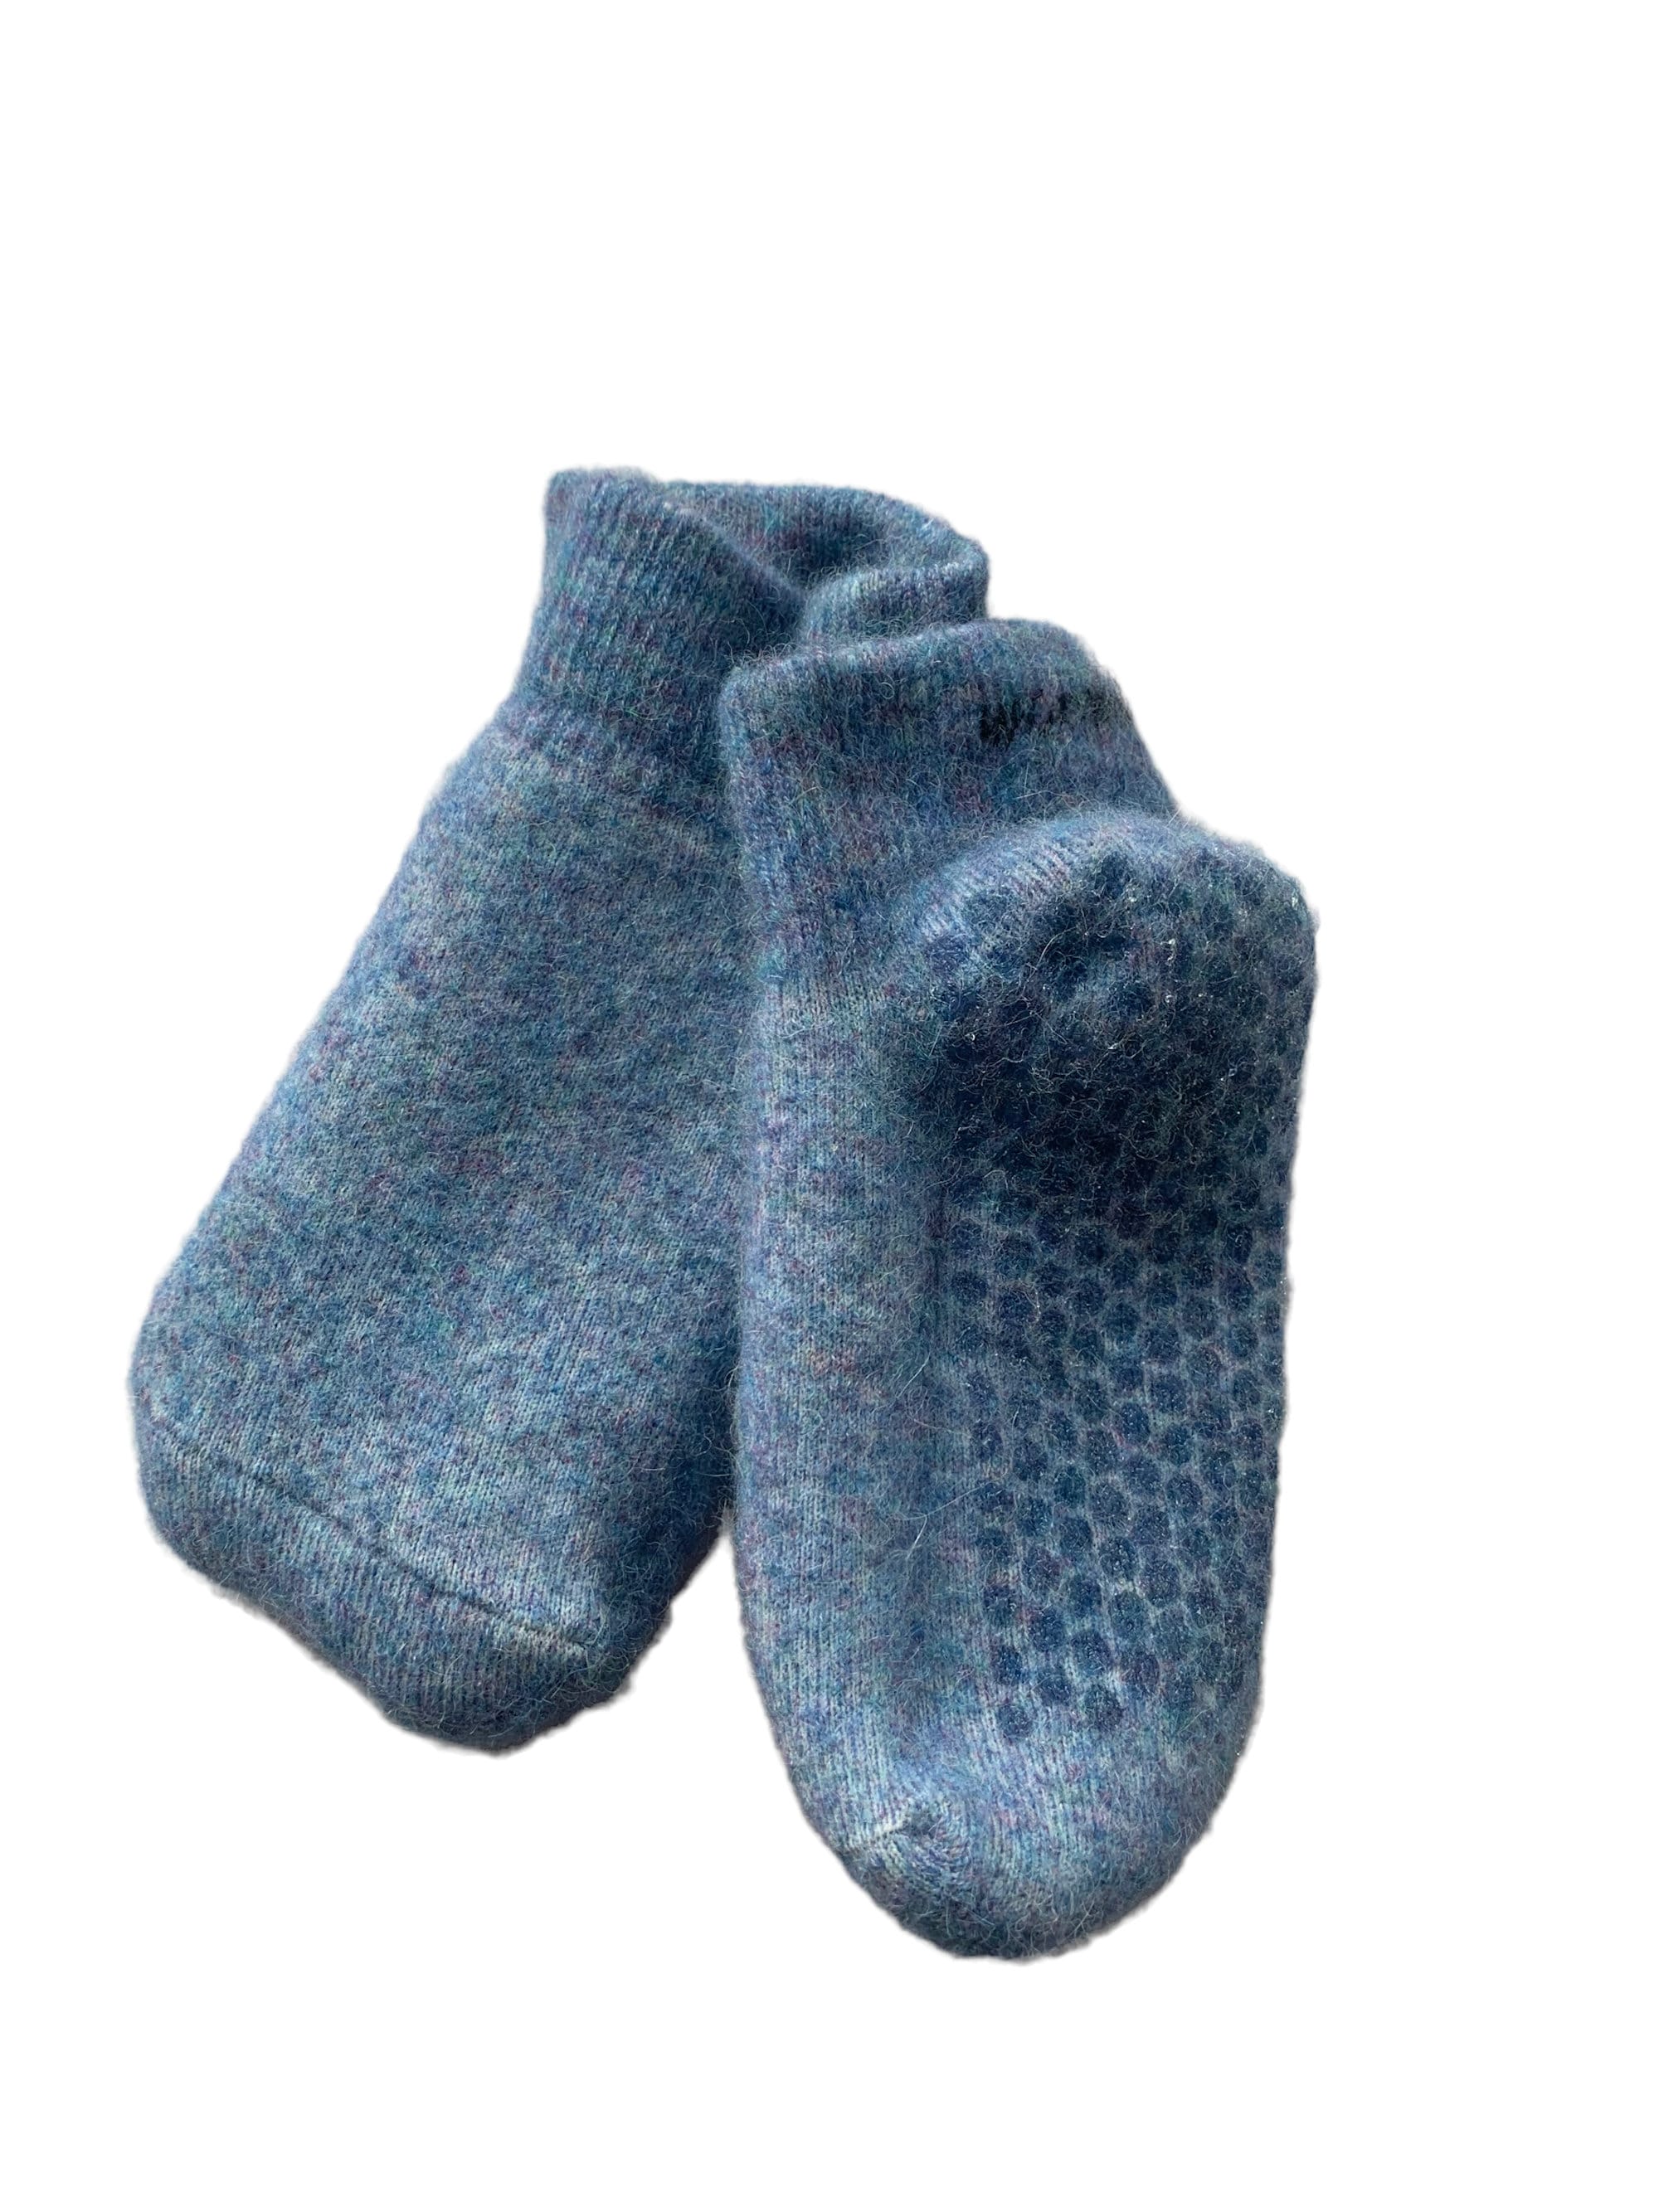 Buy Socks With Grips Online In India -  India